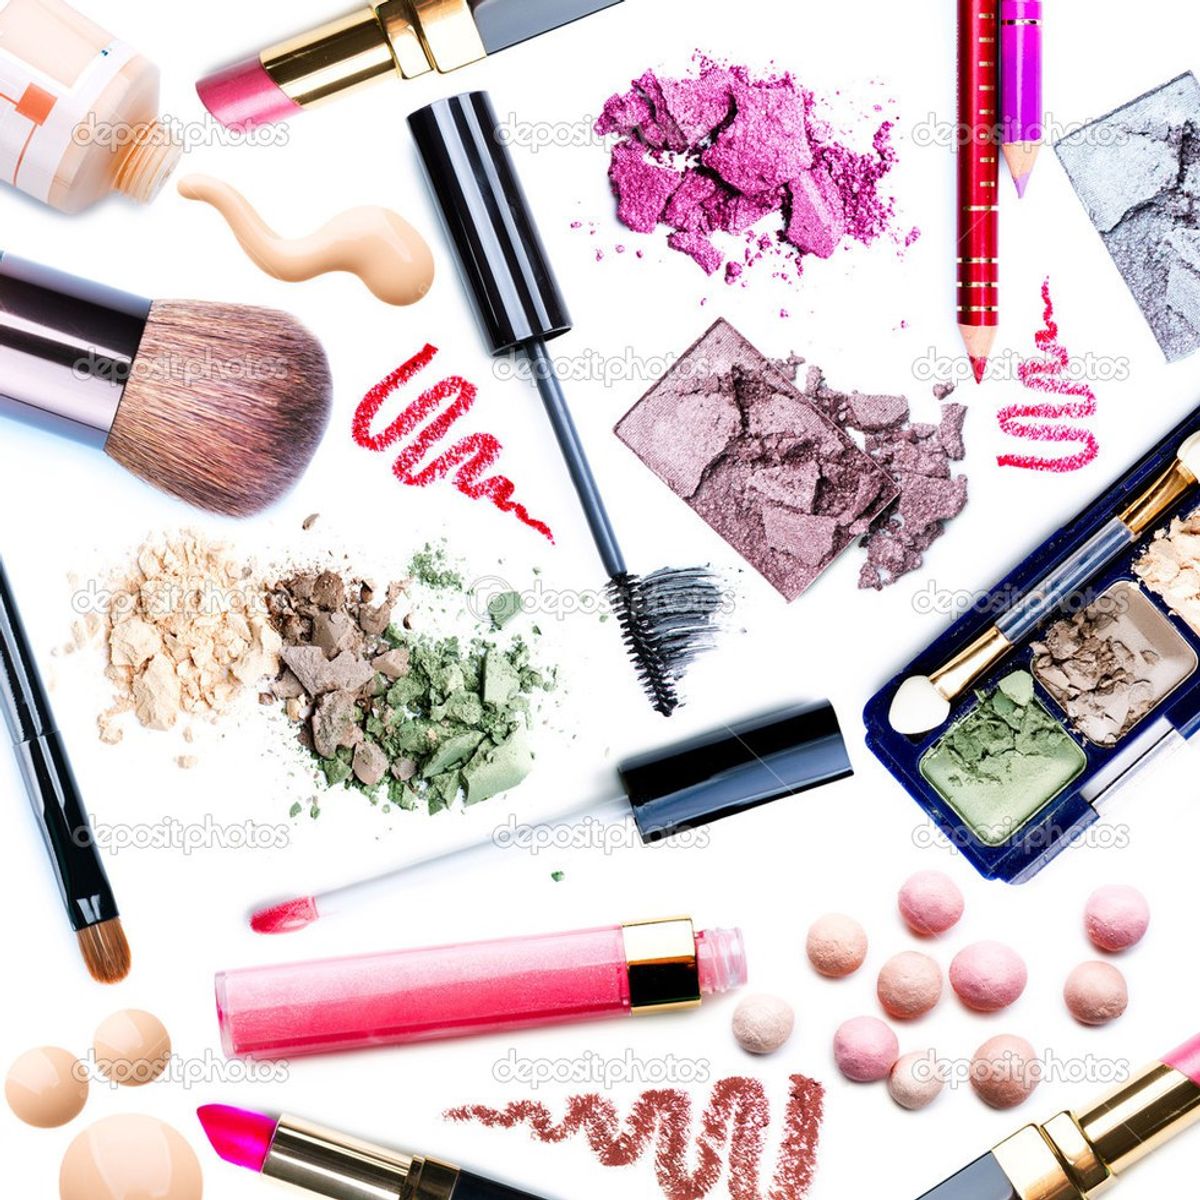 Makeup Dupes For The Makeup Lovers